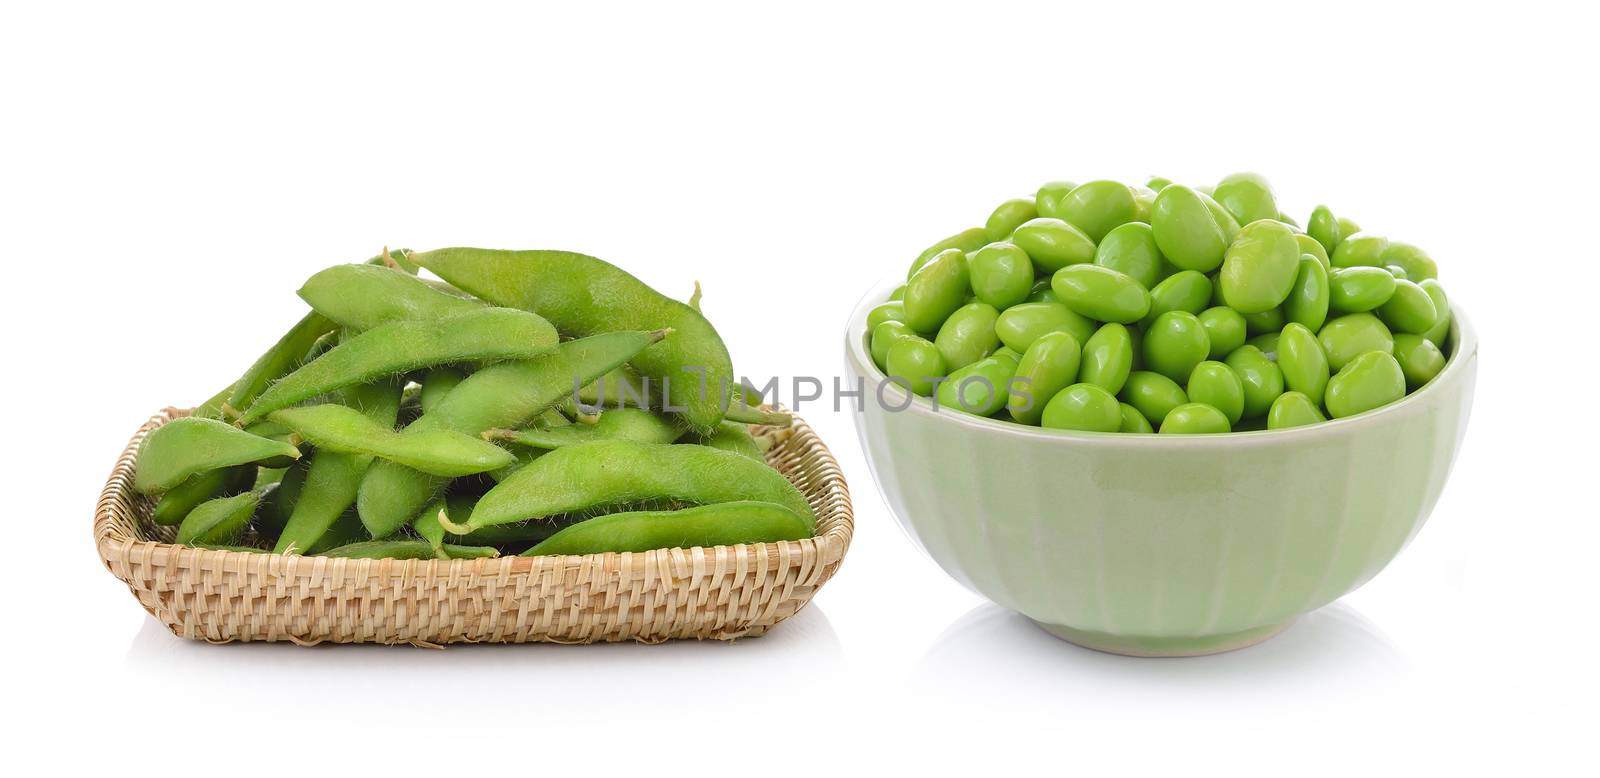  soybeans on white background by sommai